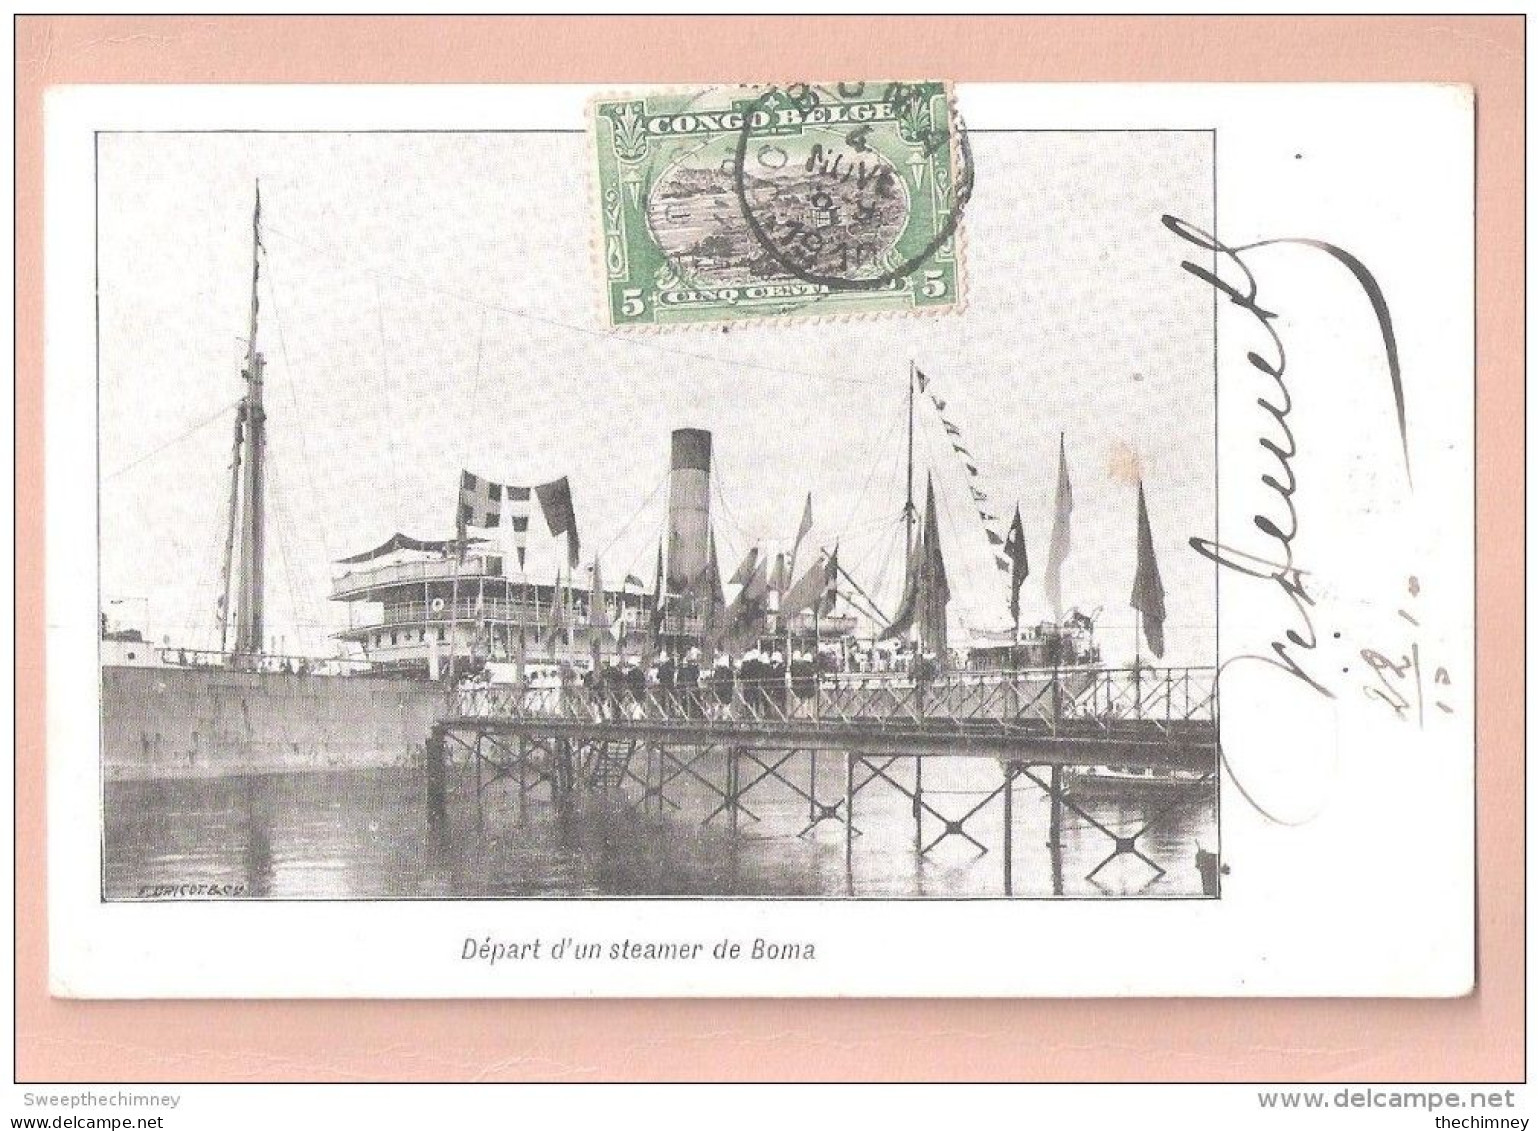 Used With Stamp 1910 Belgian Congo BOMA Depart D'un Steamer Ship Military Soldiers On A Bridge - Belgian Congo